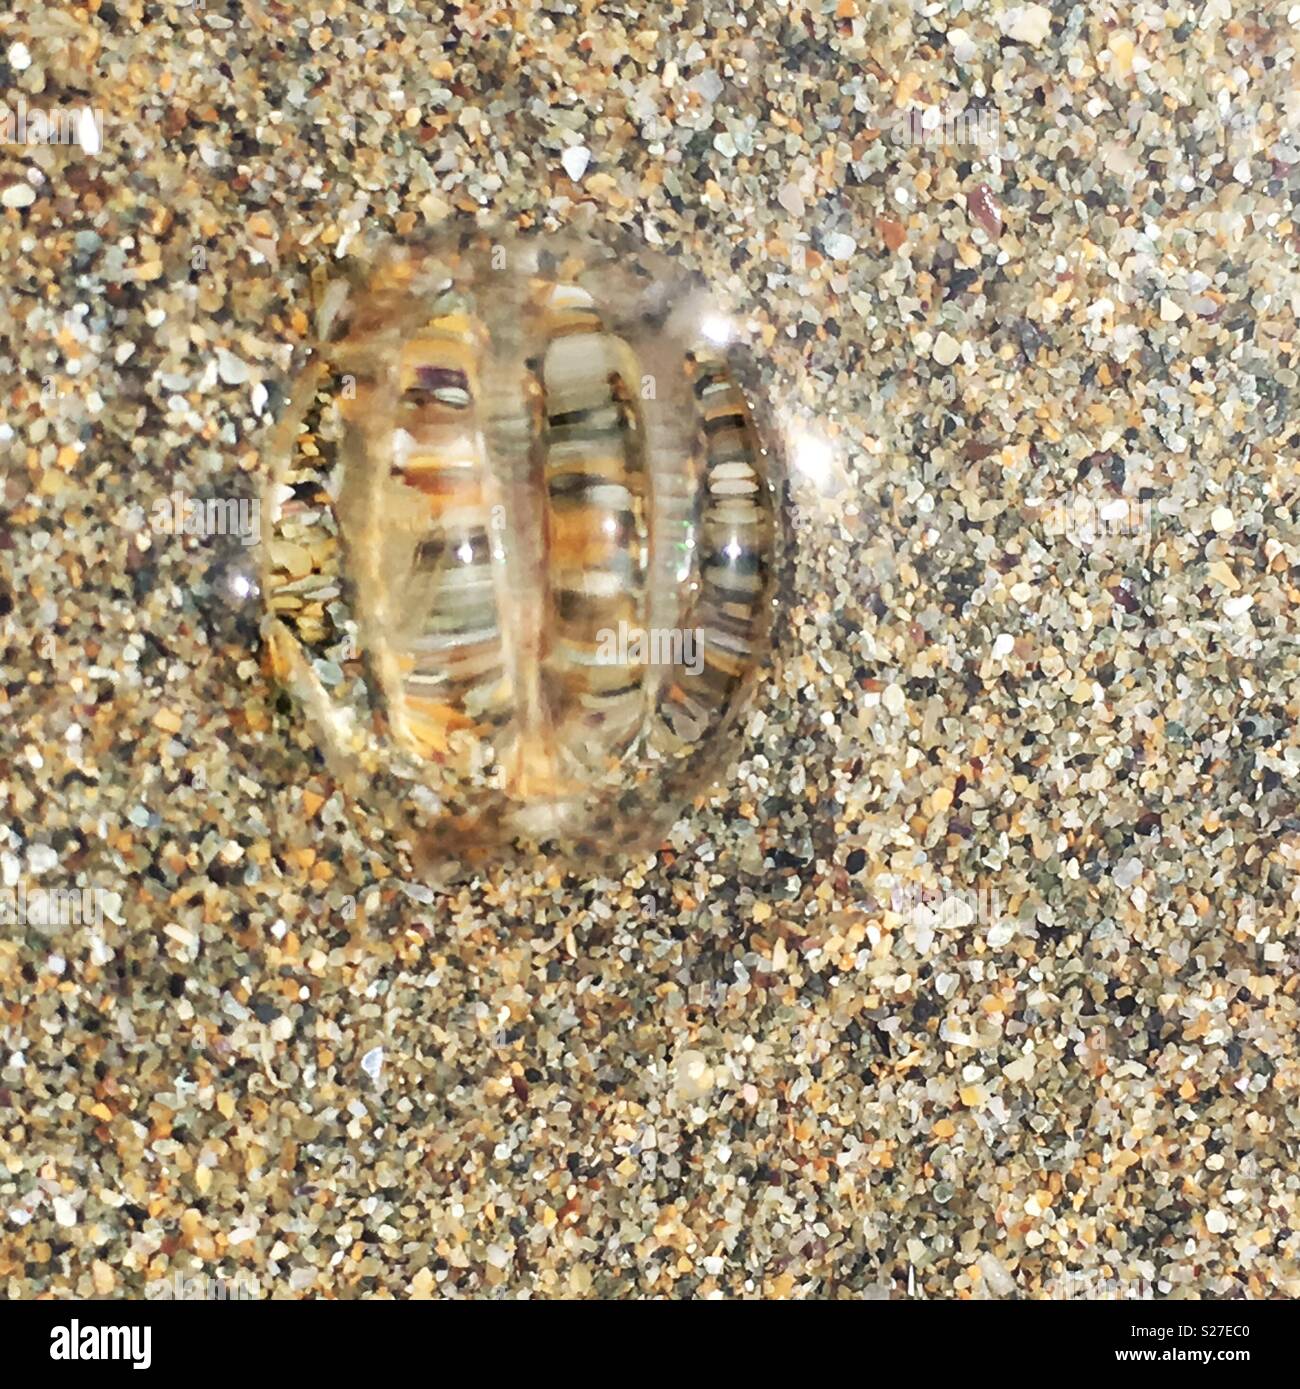 A view of a sea gooseberry from on top. Transparent and ribbed they are also known as ‘comb jellies’. Scientific name Ctenophora. Stock Photo